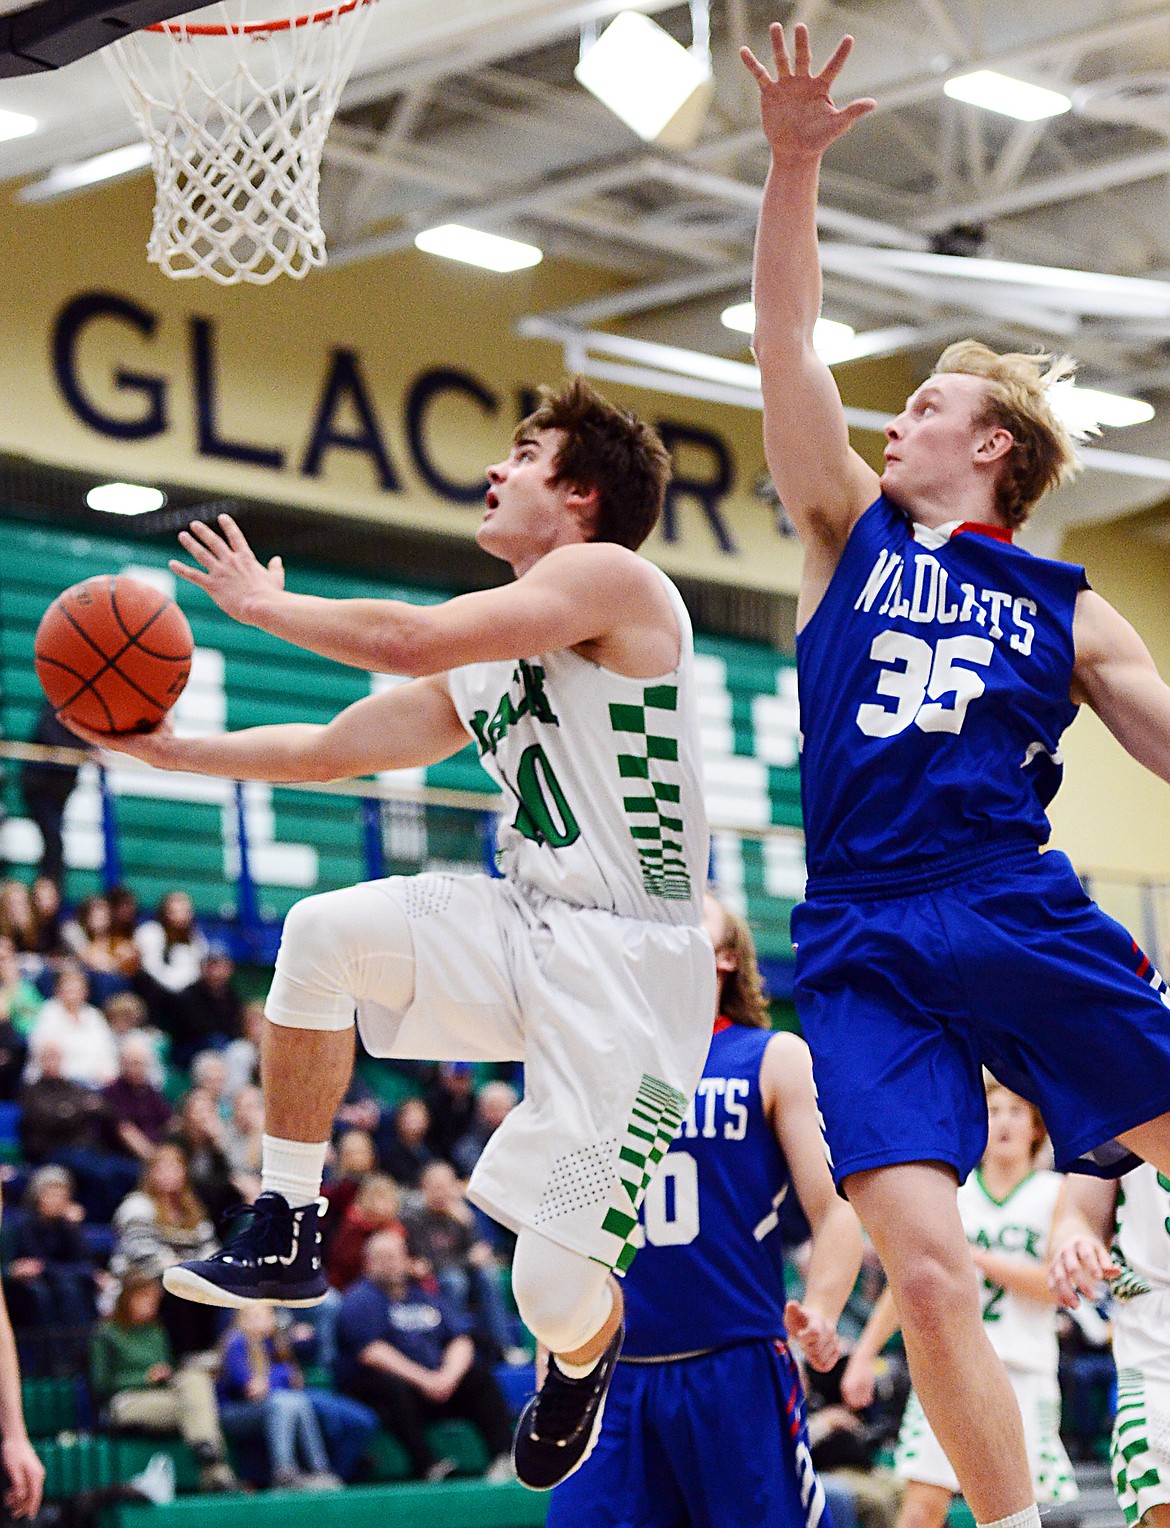 Glacier's KJ Johnson drives to the hoop for a reverse layup past Columbia Falls' Allec Knapton in the first quarter at Glacier High School on Thursday. (Casey Kreider/Daily Inter Lake)